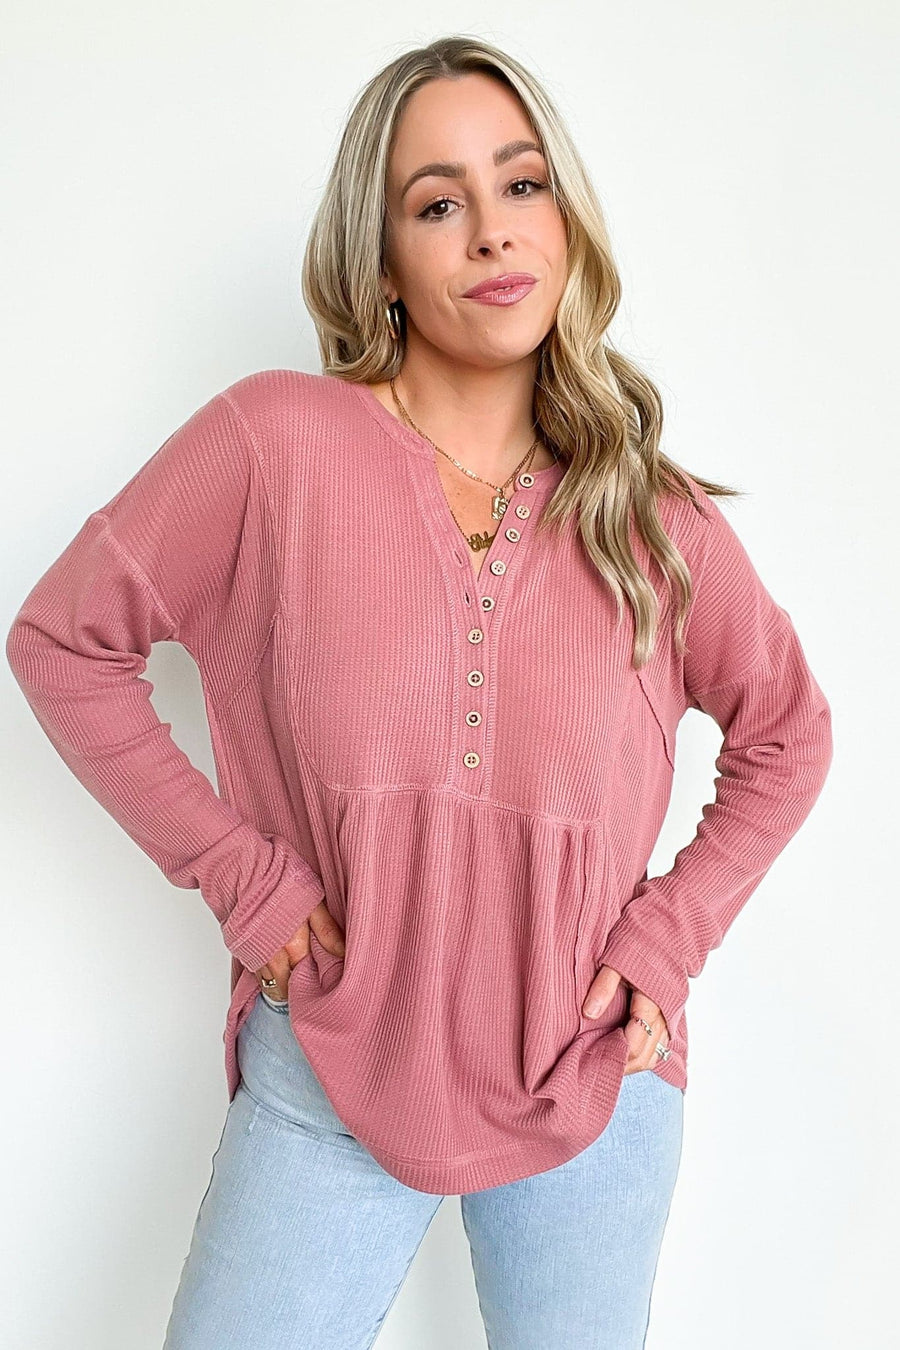 Brick / S Marilynn Waffle Knit Henley Top - BACK IN STOCK - Madison and Mallory